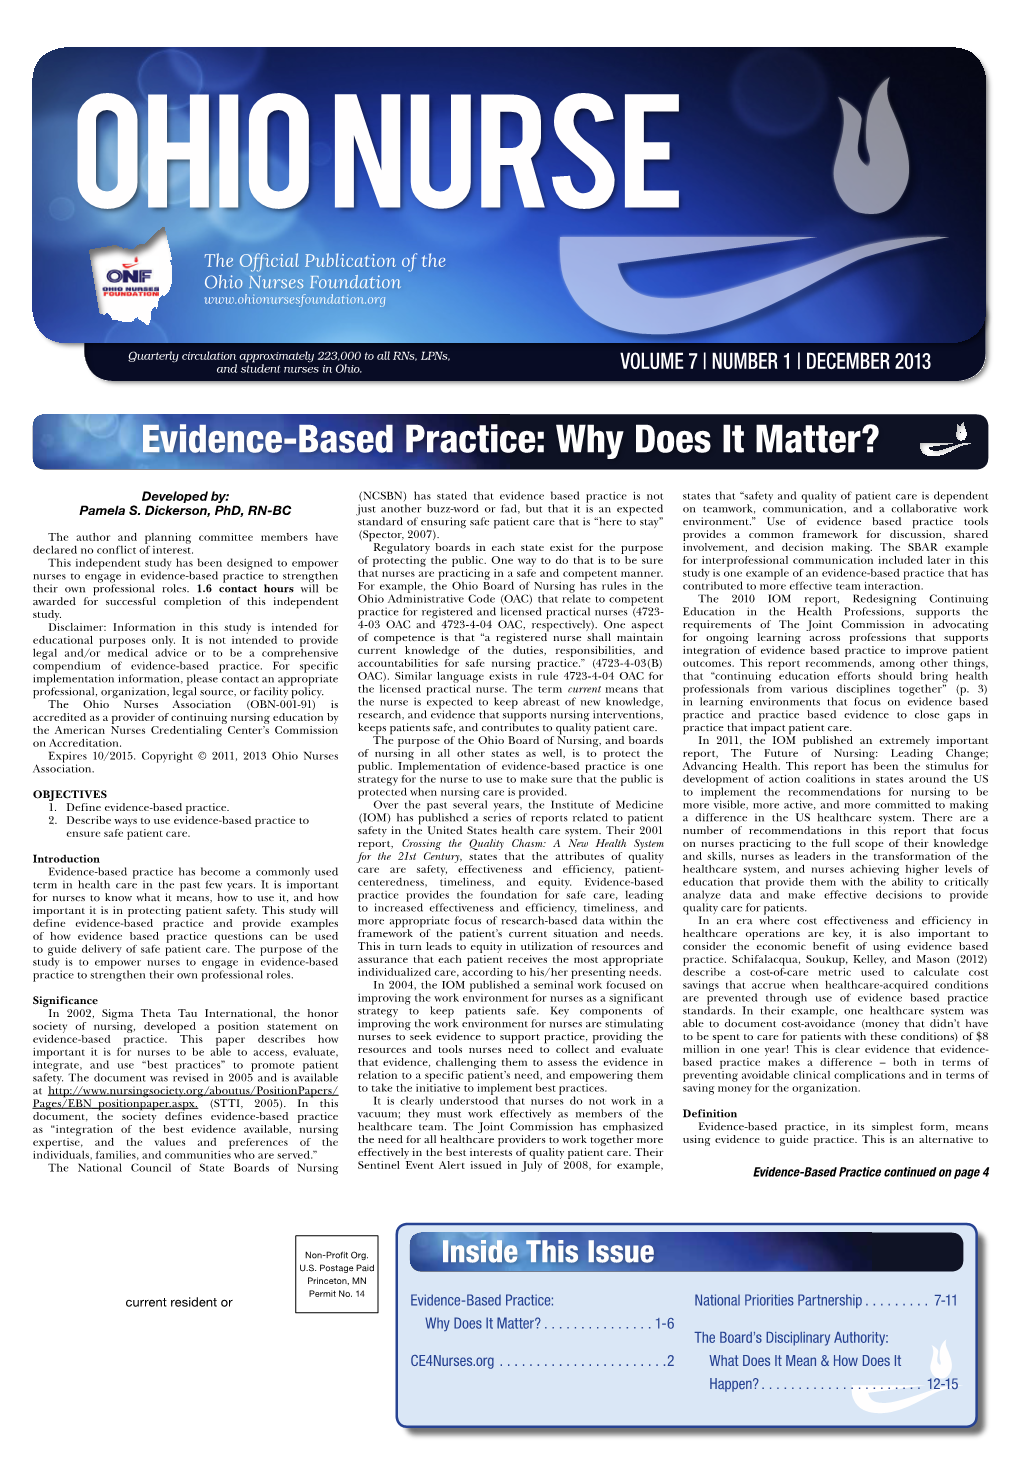 Evidence-Based Practice: Why Does It Matter?